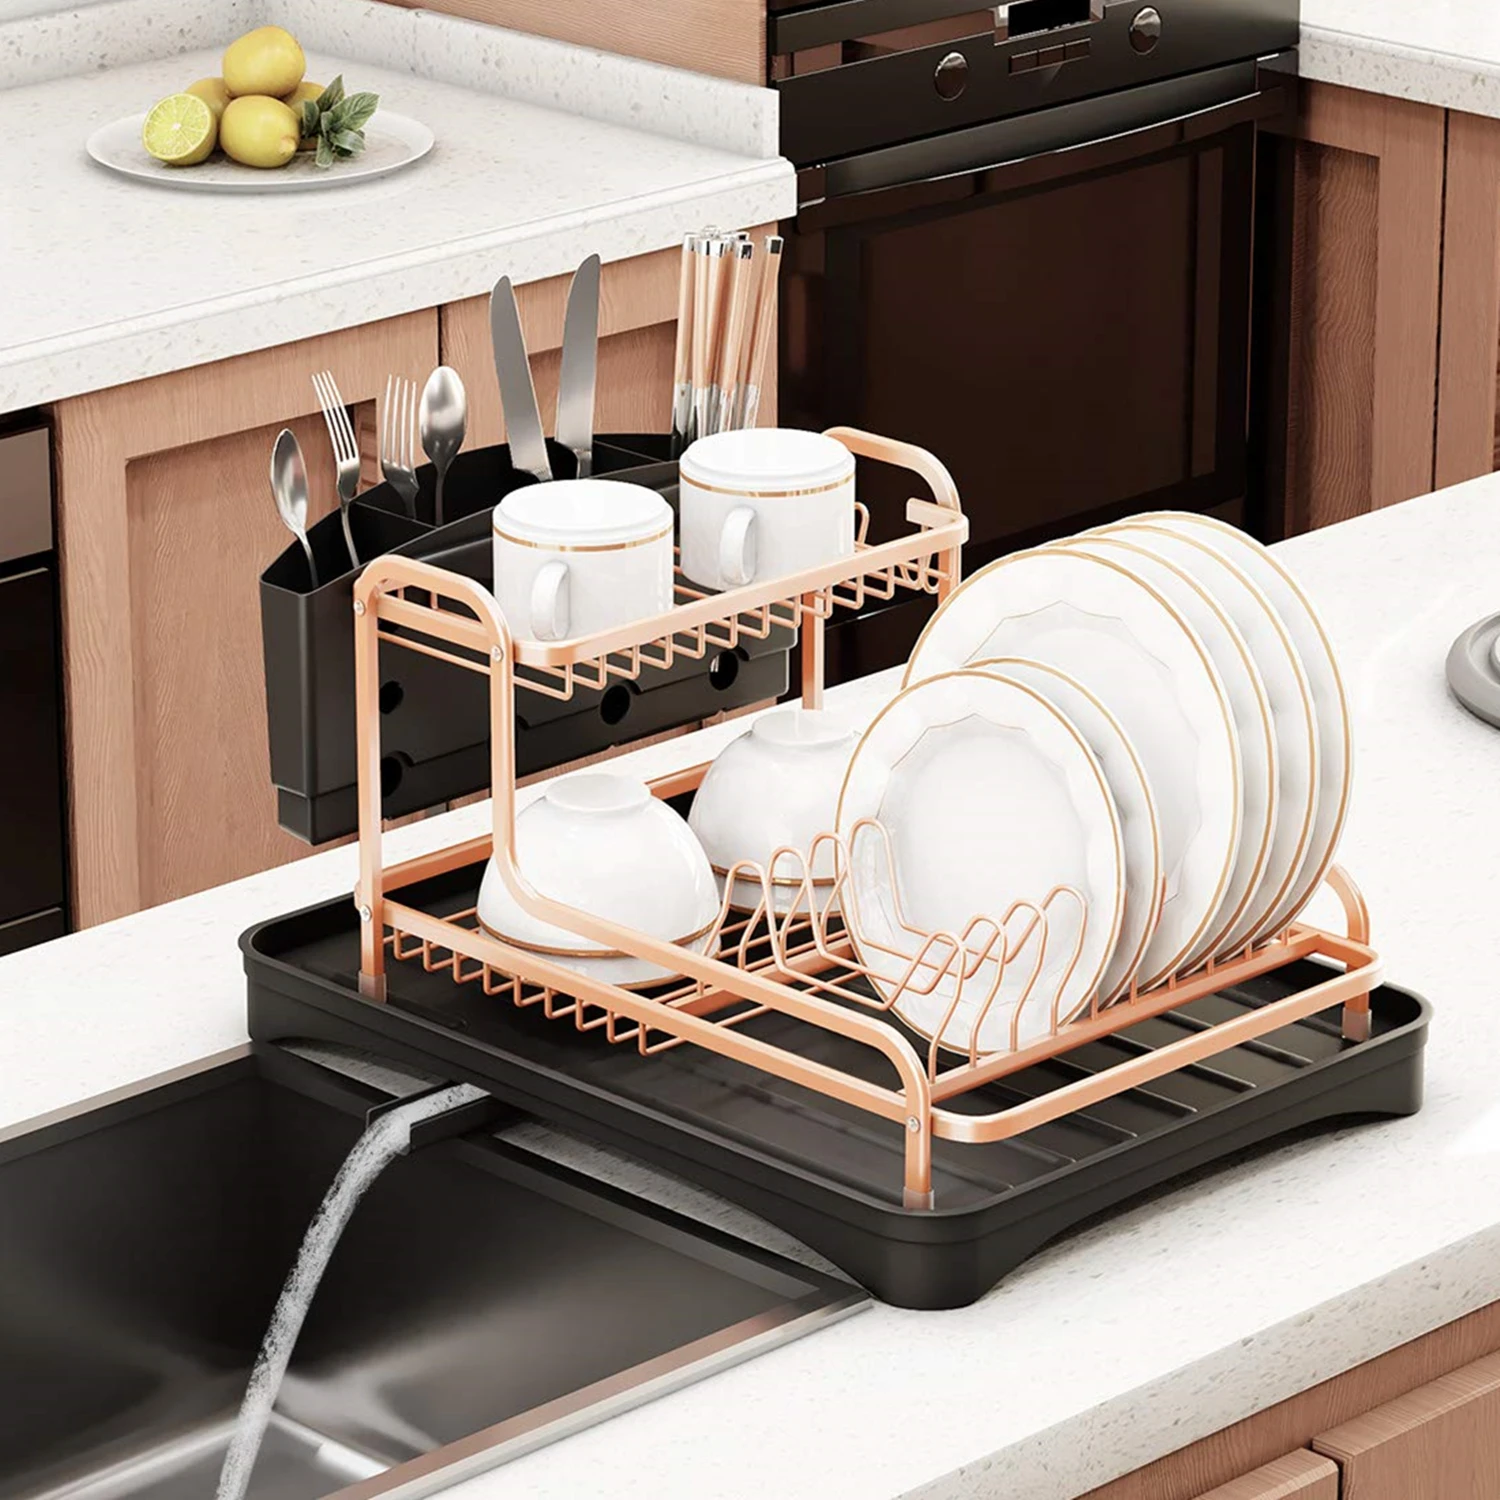 https://ae01.alicdn.com/kf/H4d002aeb58304ab2bbe97edd5a7c7238X/Double-Layer-Aluminum-Alloy-Sink-Stand-Dish-Drying-Rack-Kitchen-Organizer-Drainer-Plate-Holder-Cutlery-Storage.jpg